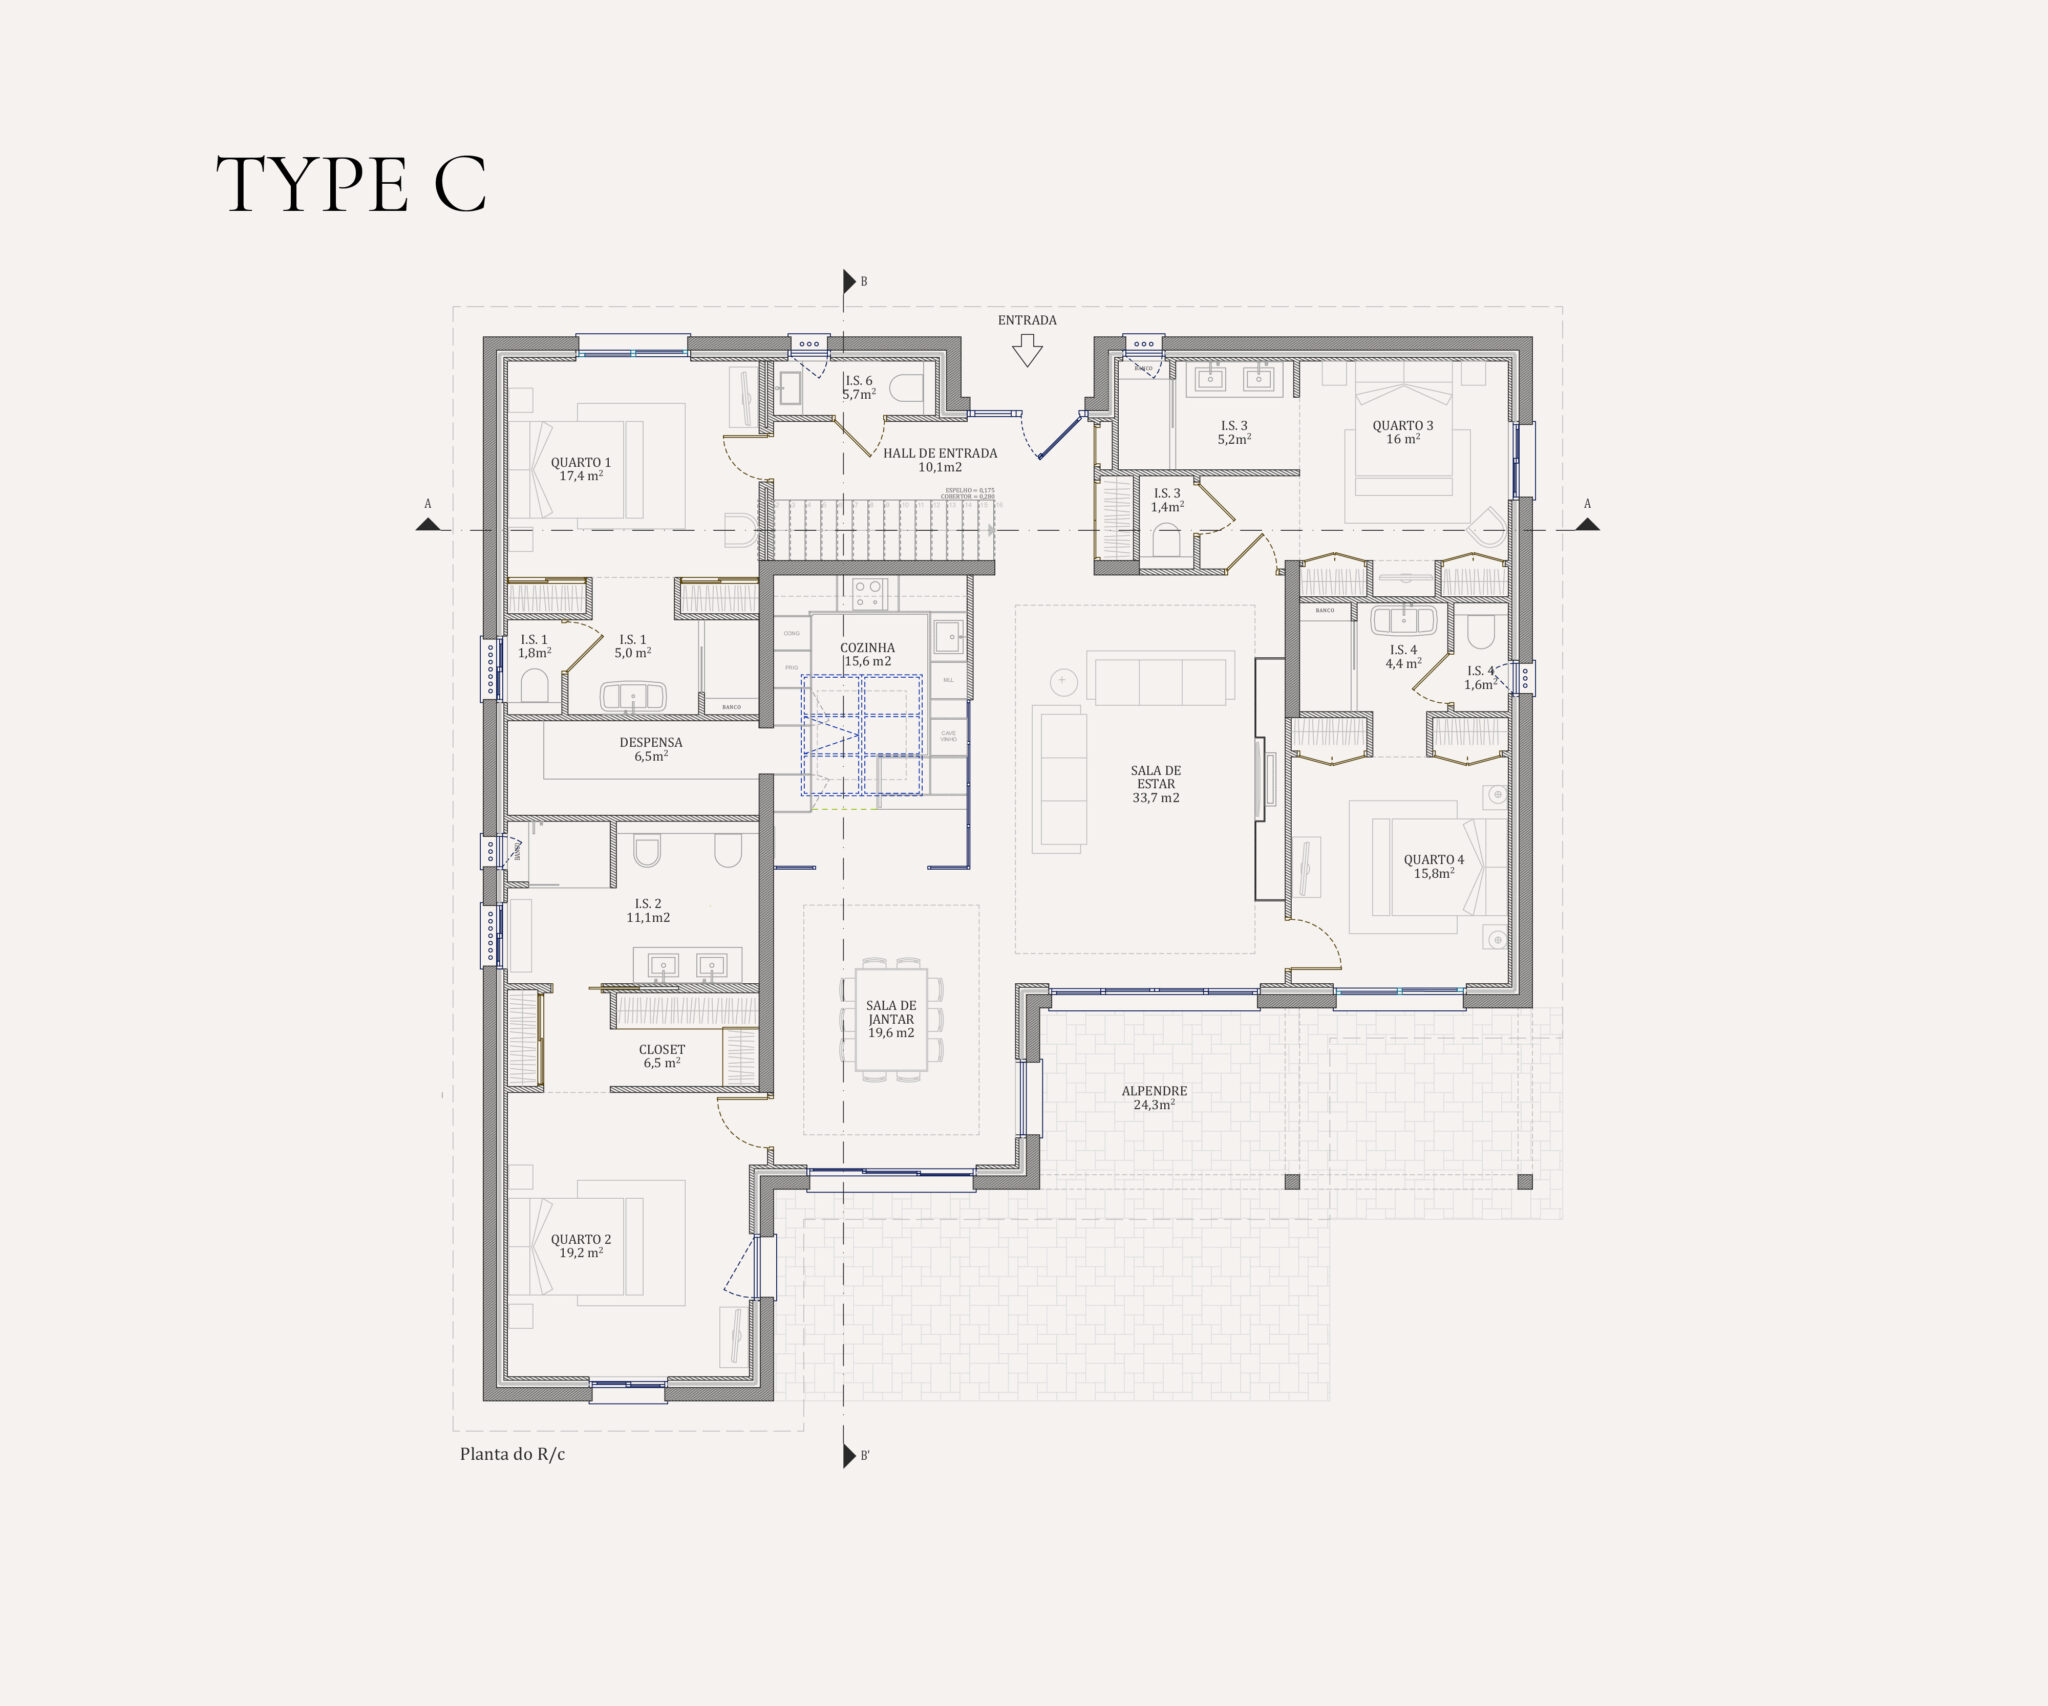 Example of the architecture of the ground floor of type C houses